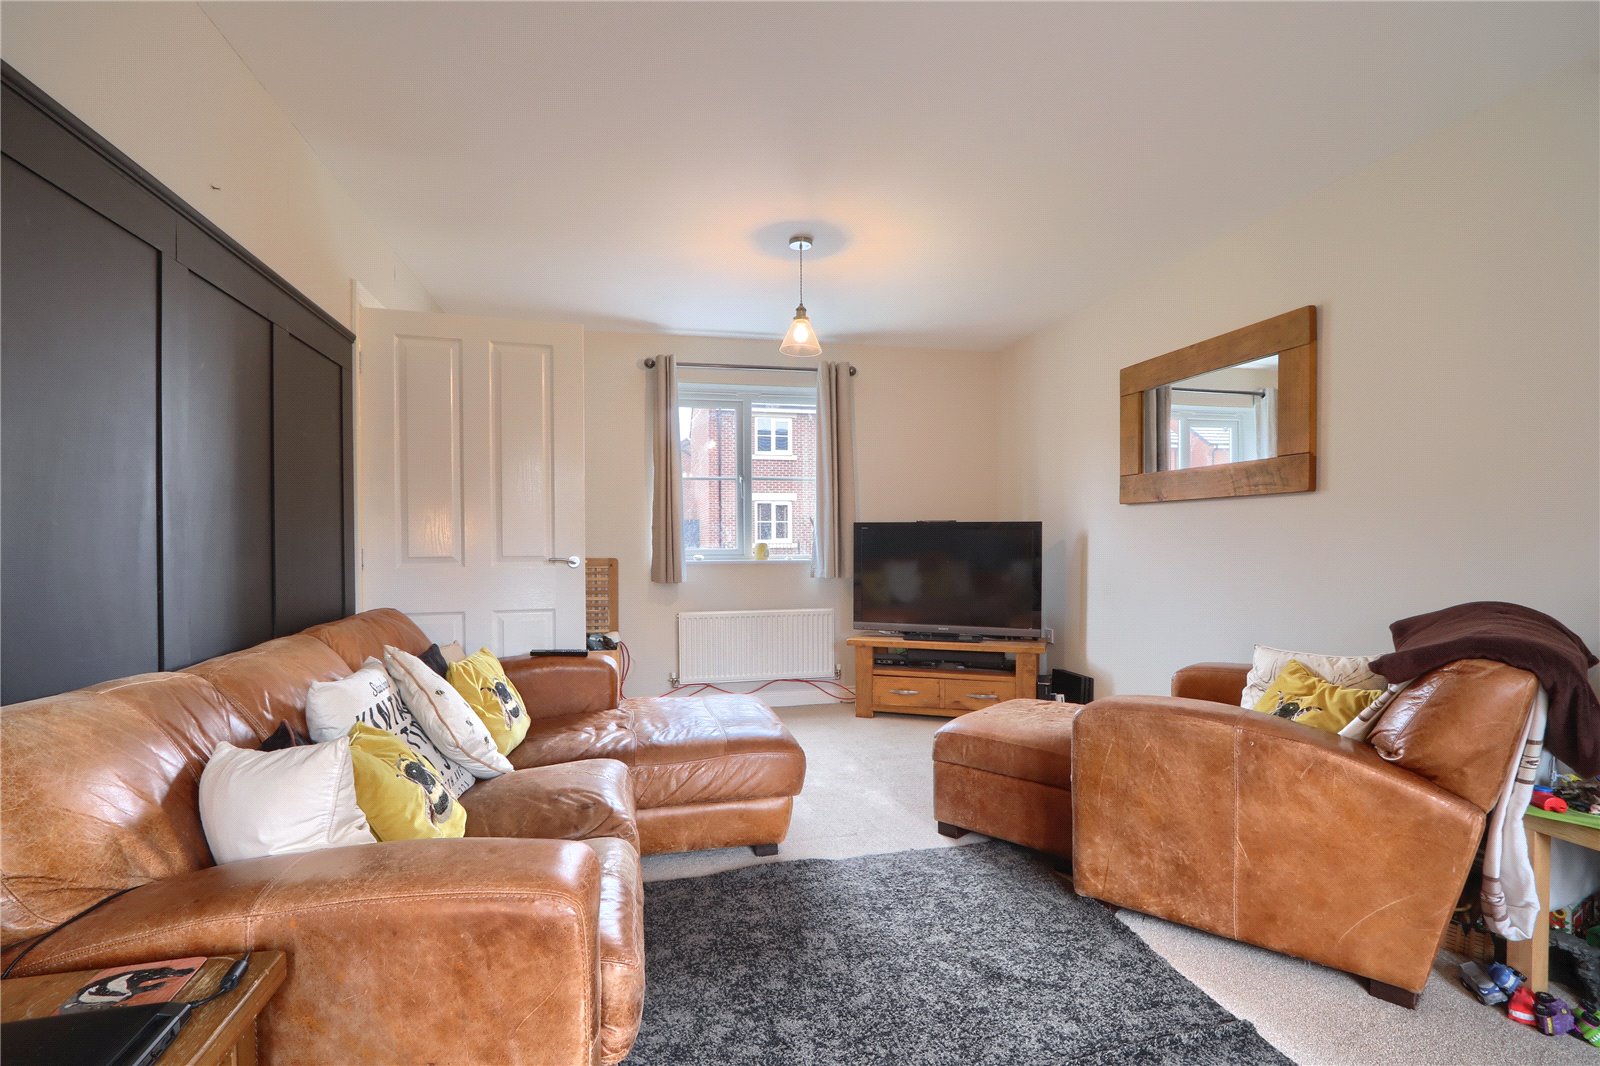 4 bed house for sale in Carina Crescent, Stockton-on-Tees  - Property Image 2